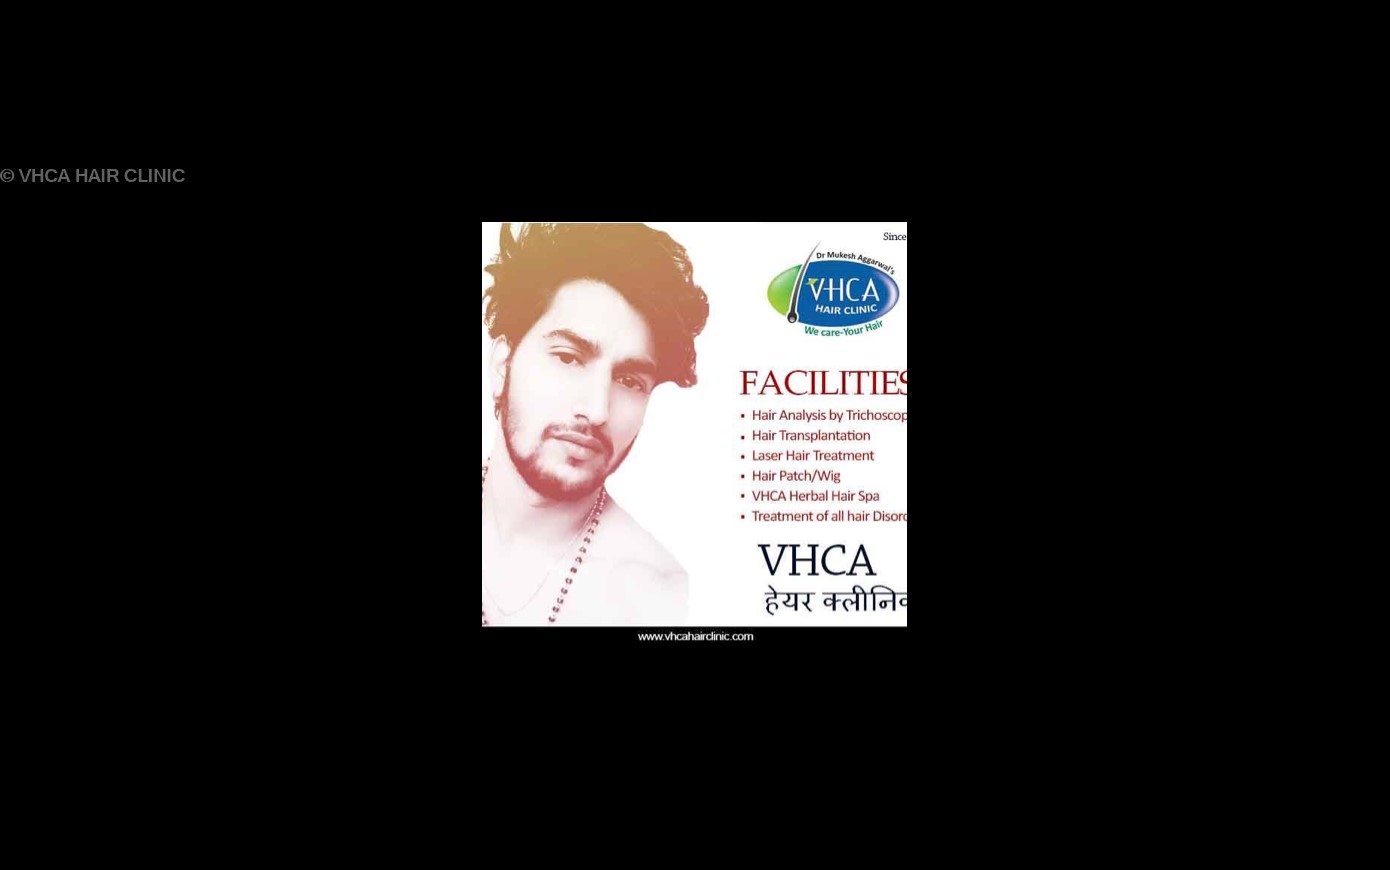 VHCA Now in Hisar Grand Opening of VHCA Hair Clinic Franchise Worlds  First Ayurvedic Hair Clinic  YouTube